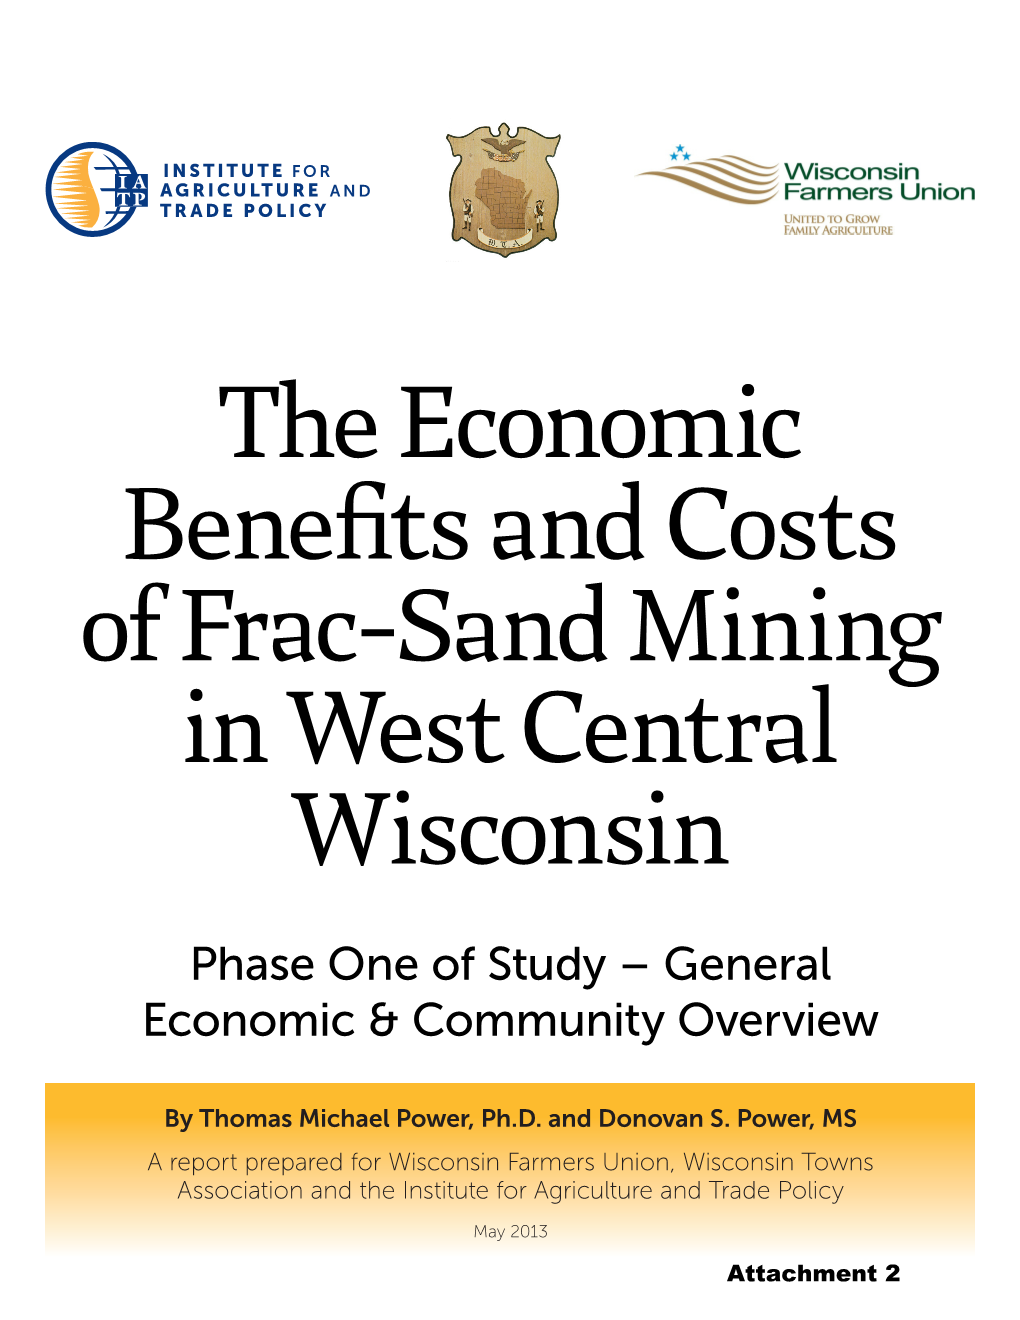 The Economic Benefits and Costs of Frac-Sand Mining in West Central Wisconsin Phase One of Study – General Economic & Community Overview